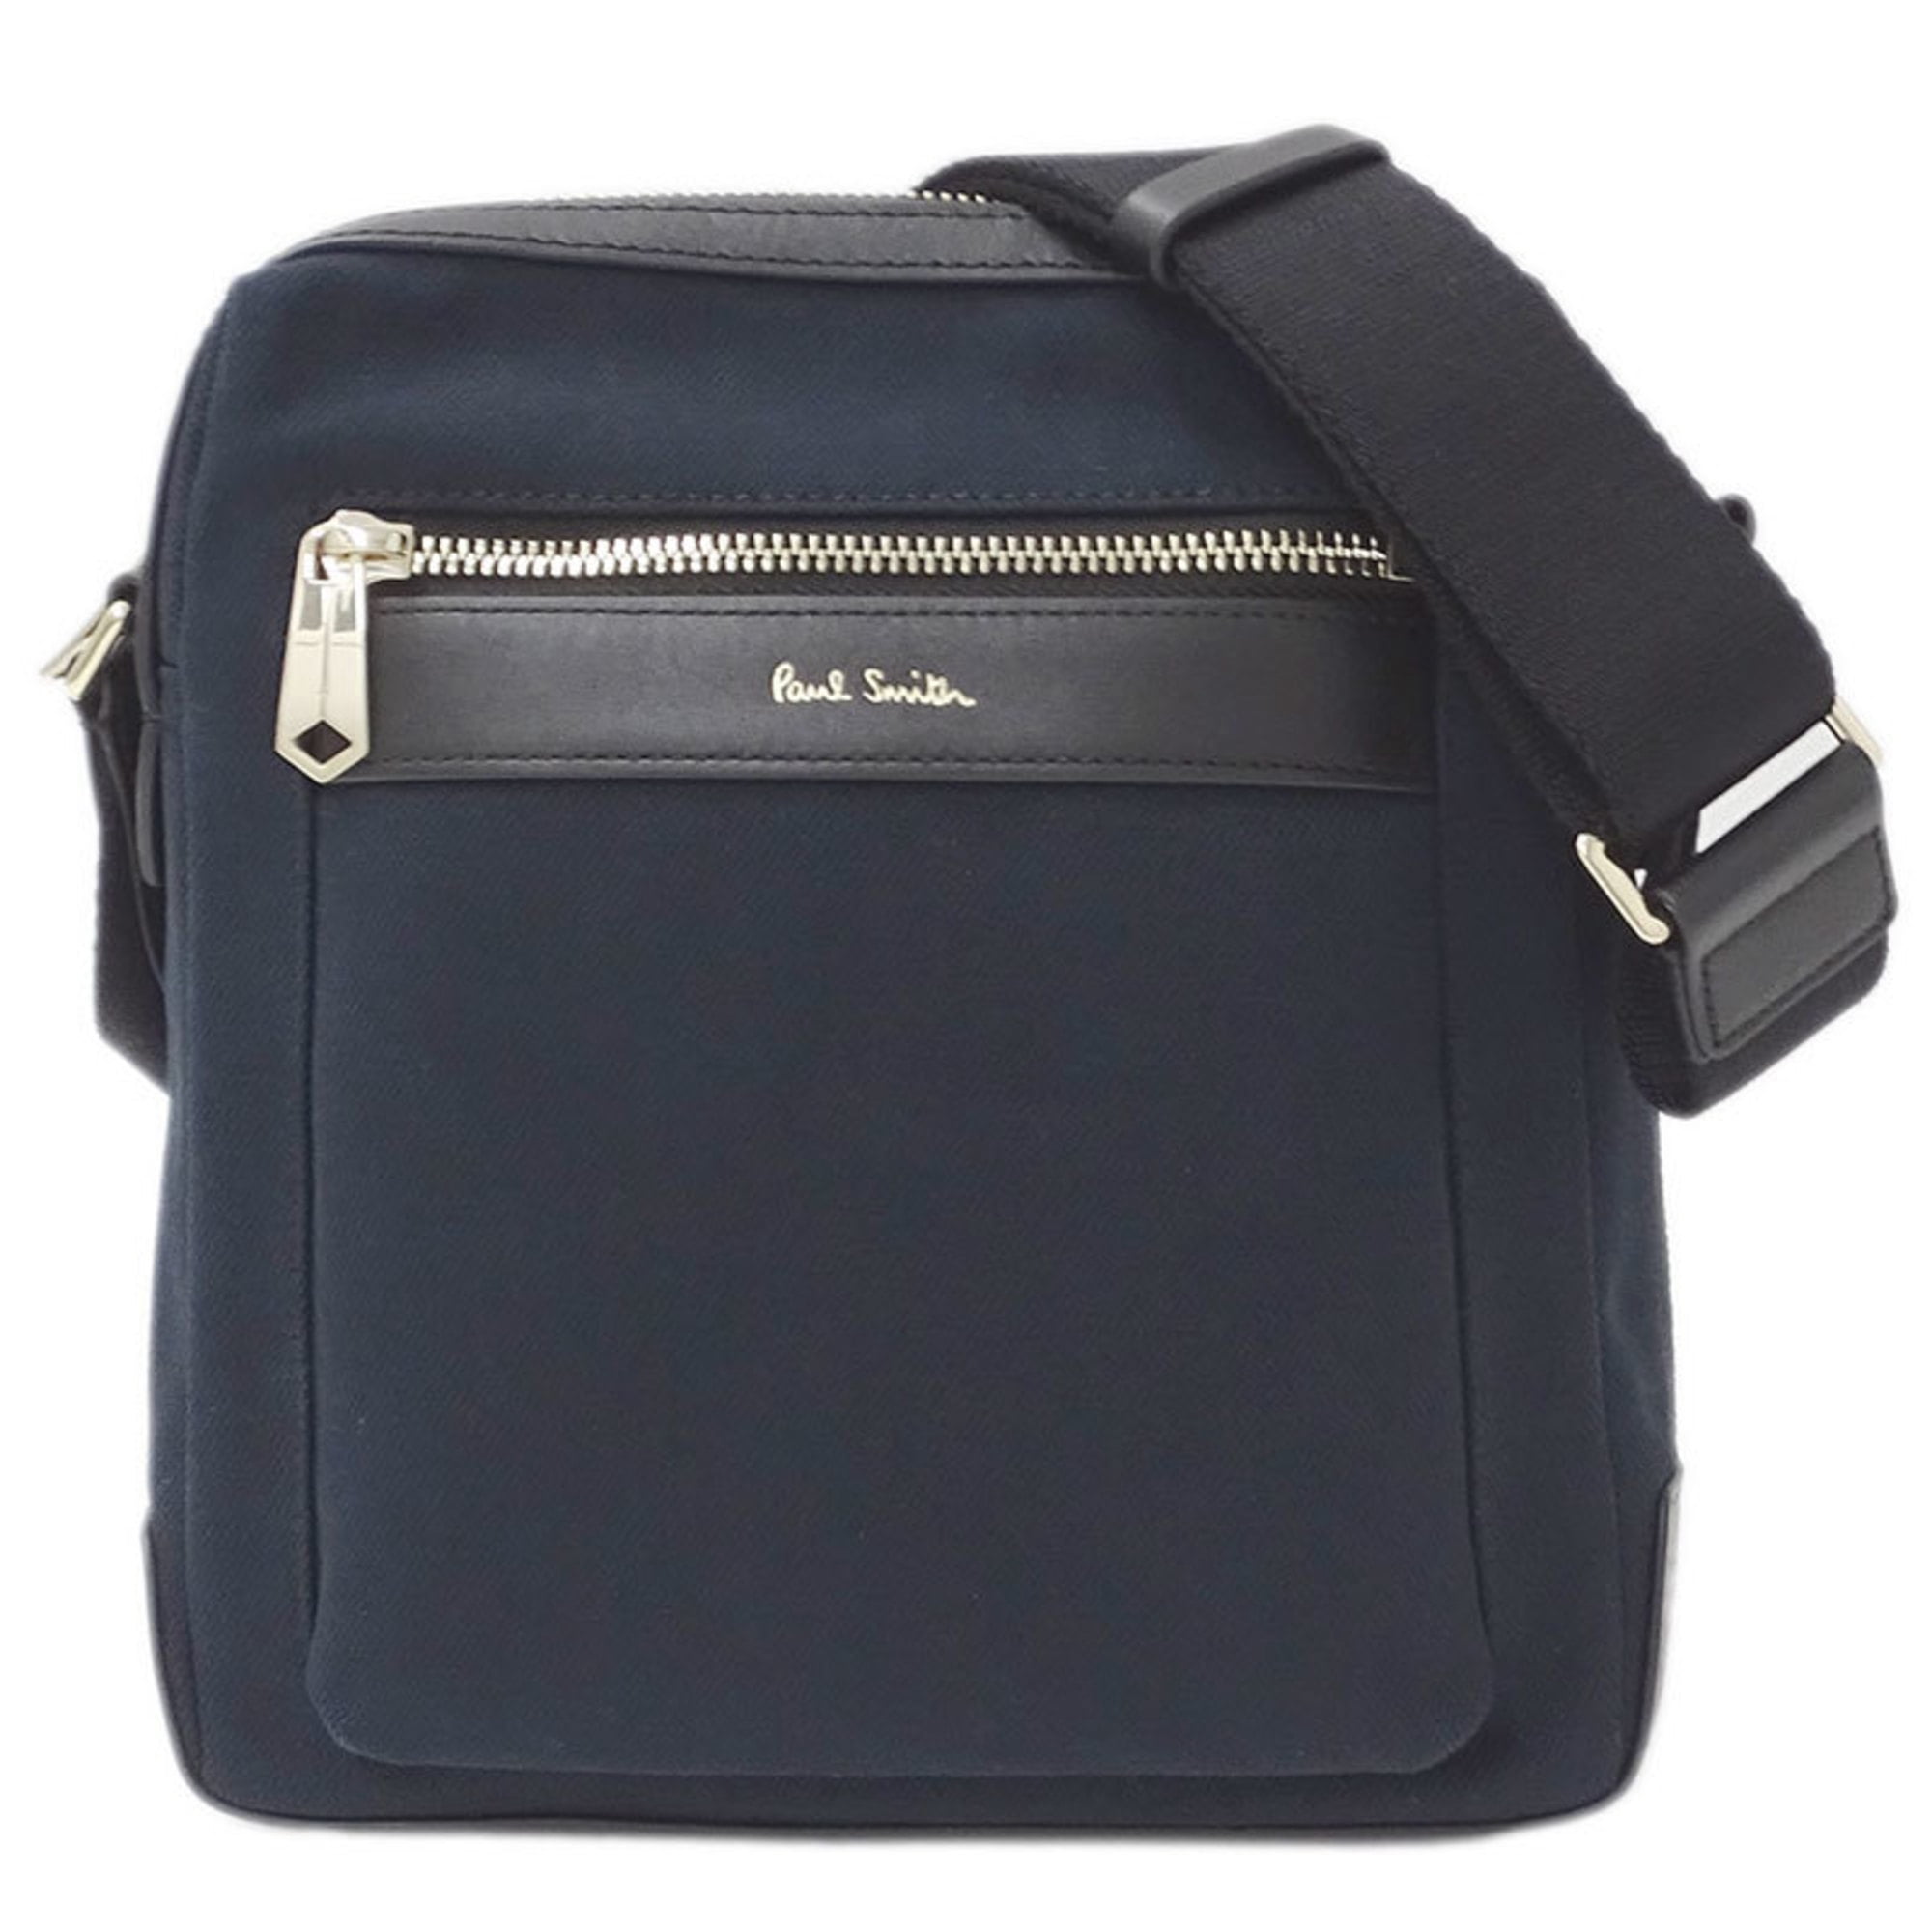 Authenticated Used Paul Smith Bag Men's Shoulder Canvas Calf Leather Navy 